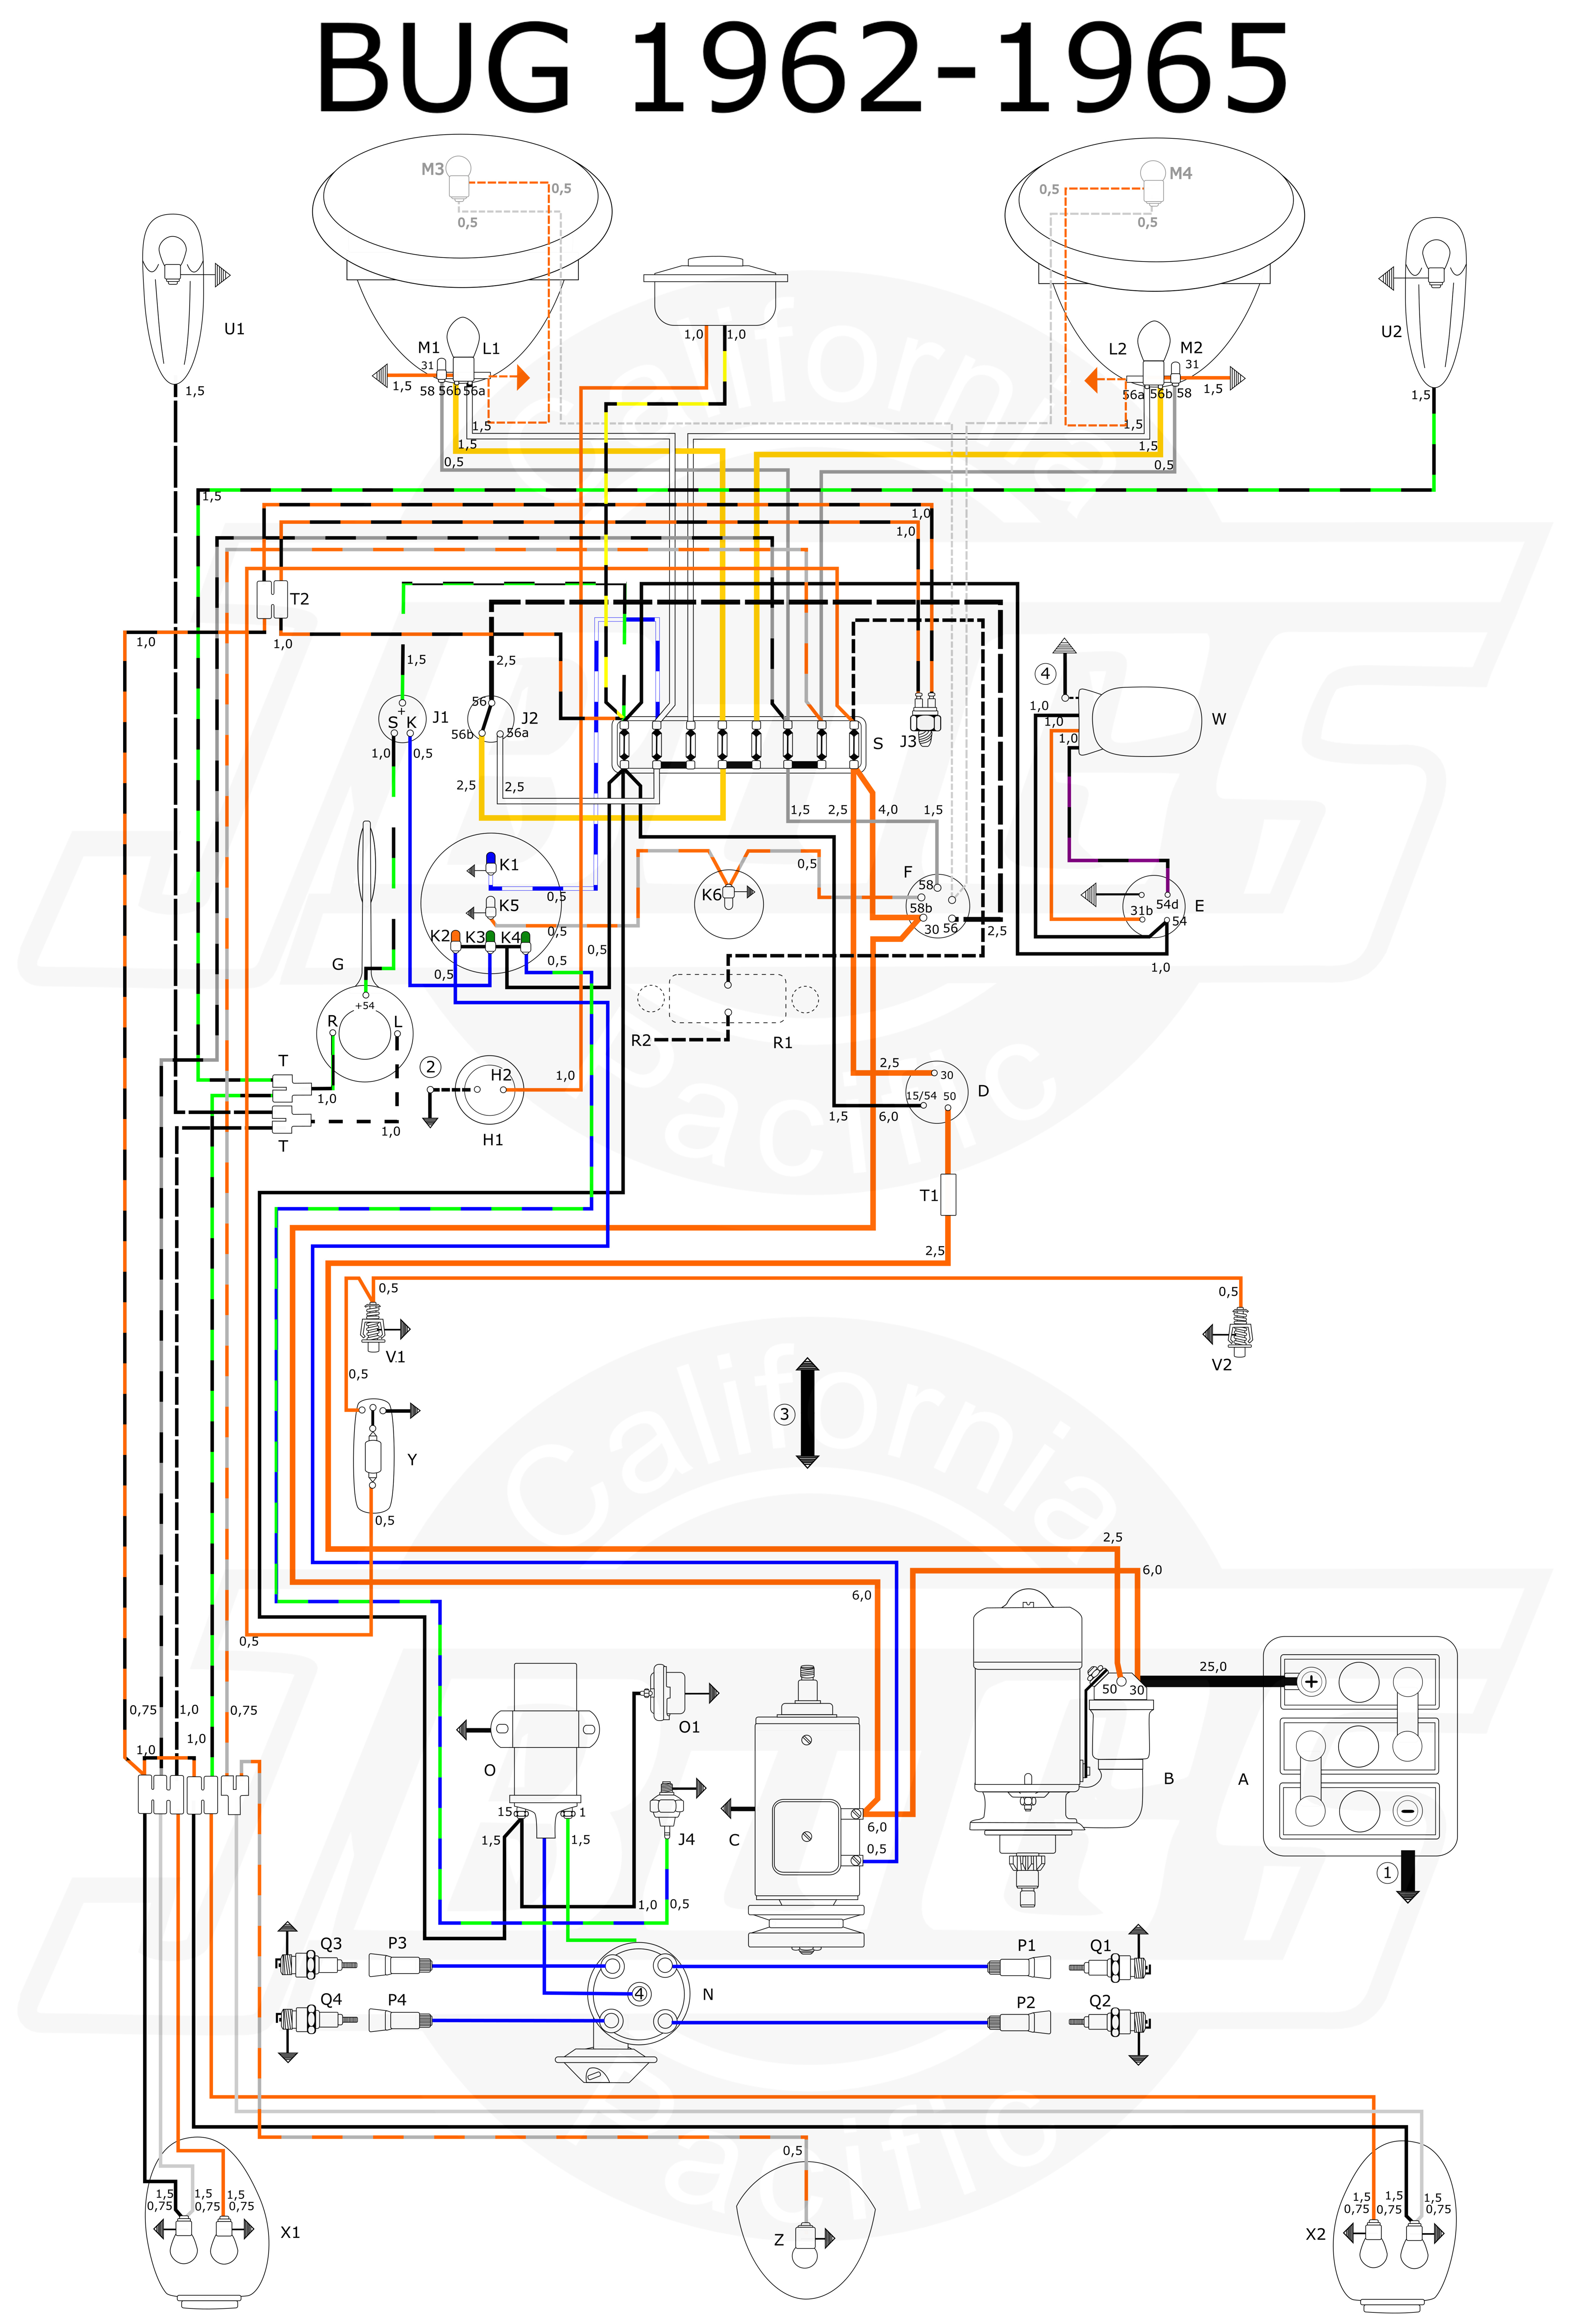 VW Tech Article 1960-61 Wiring Diagram vw ignition wiring diagram 